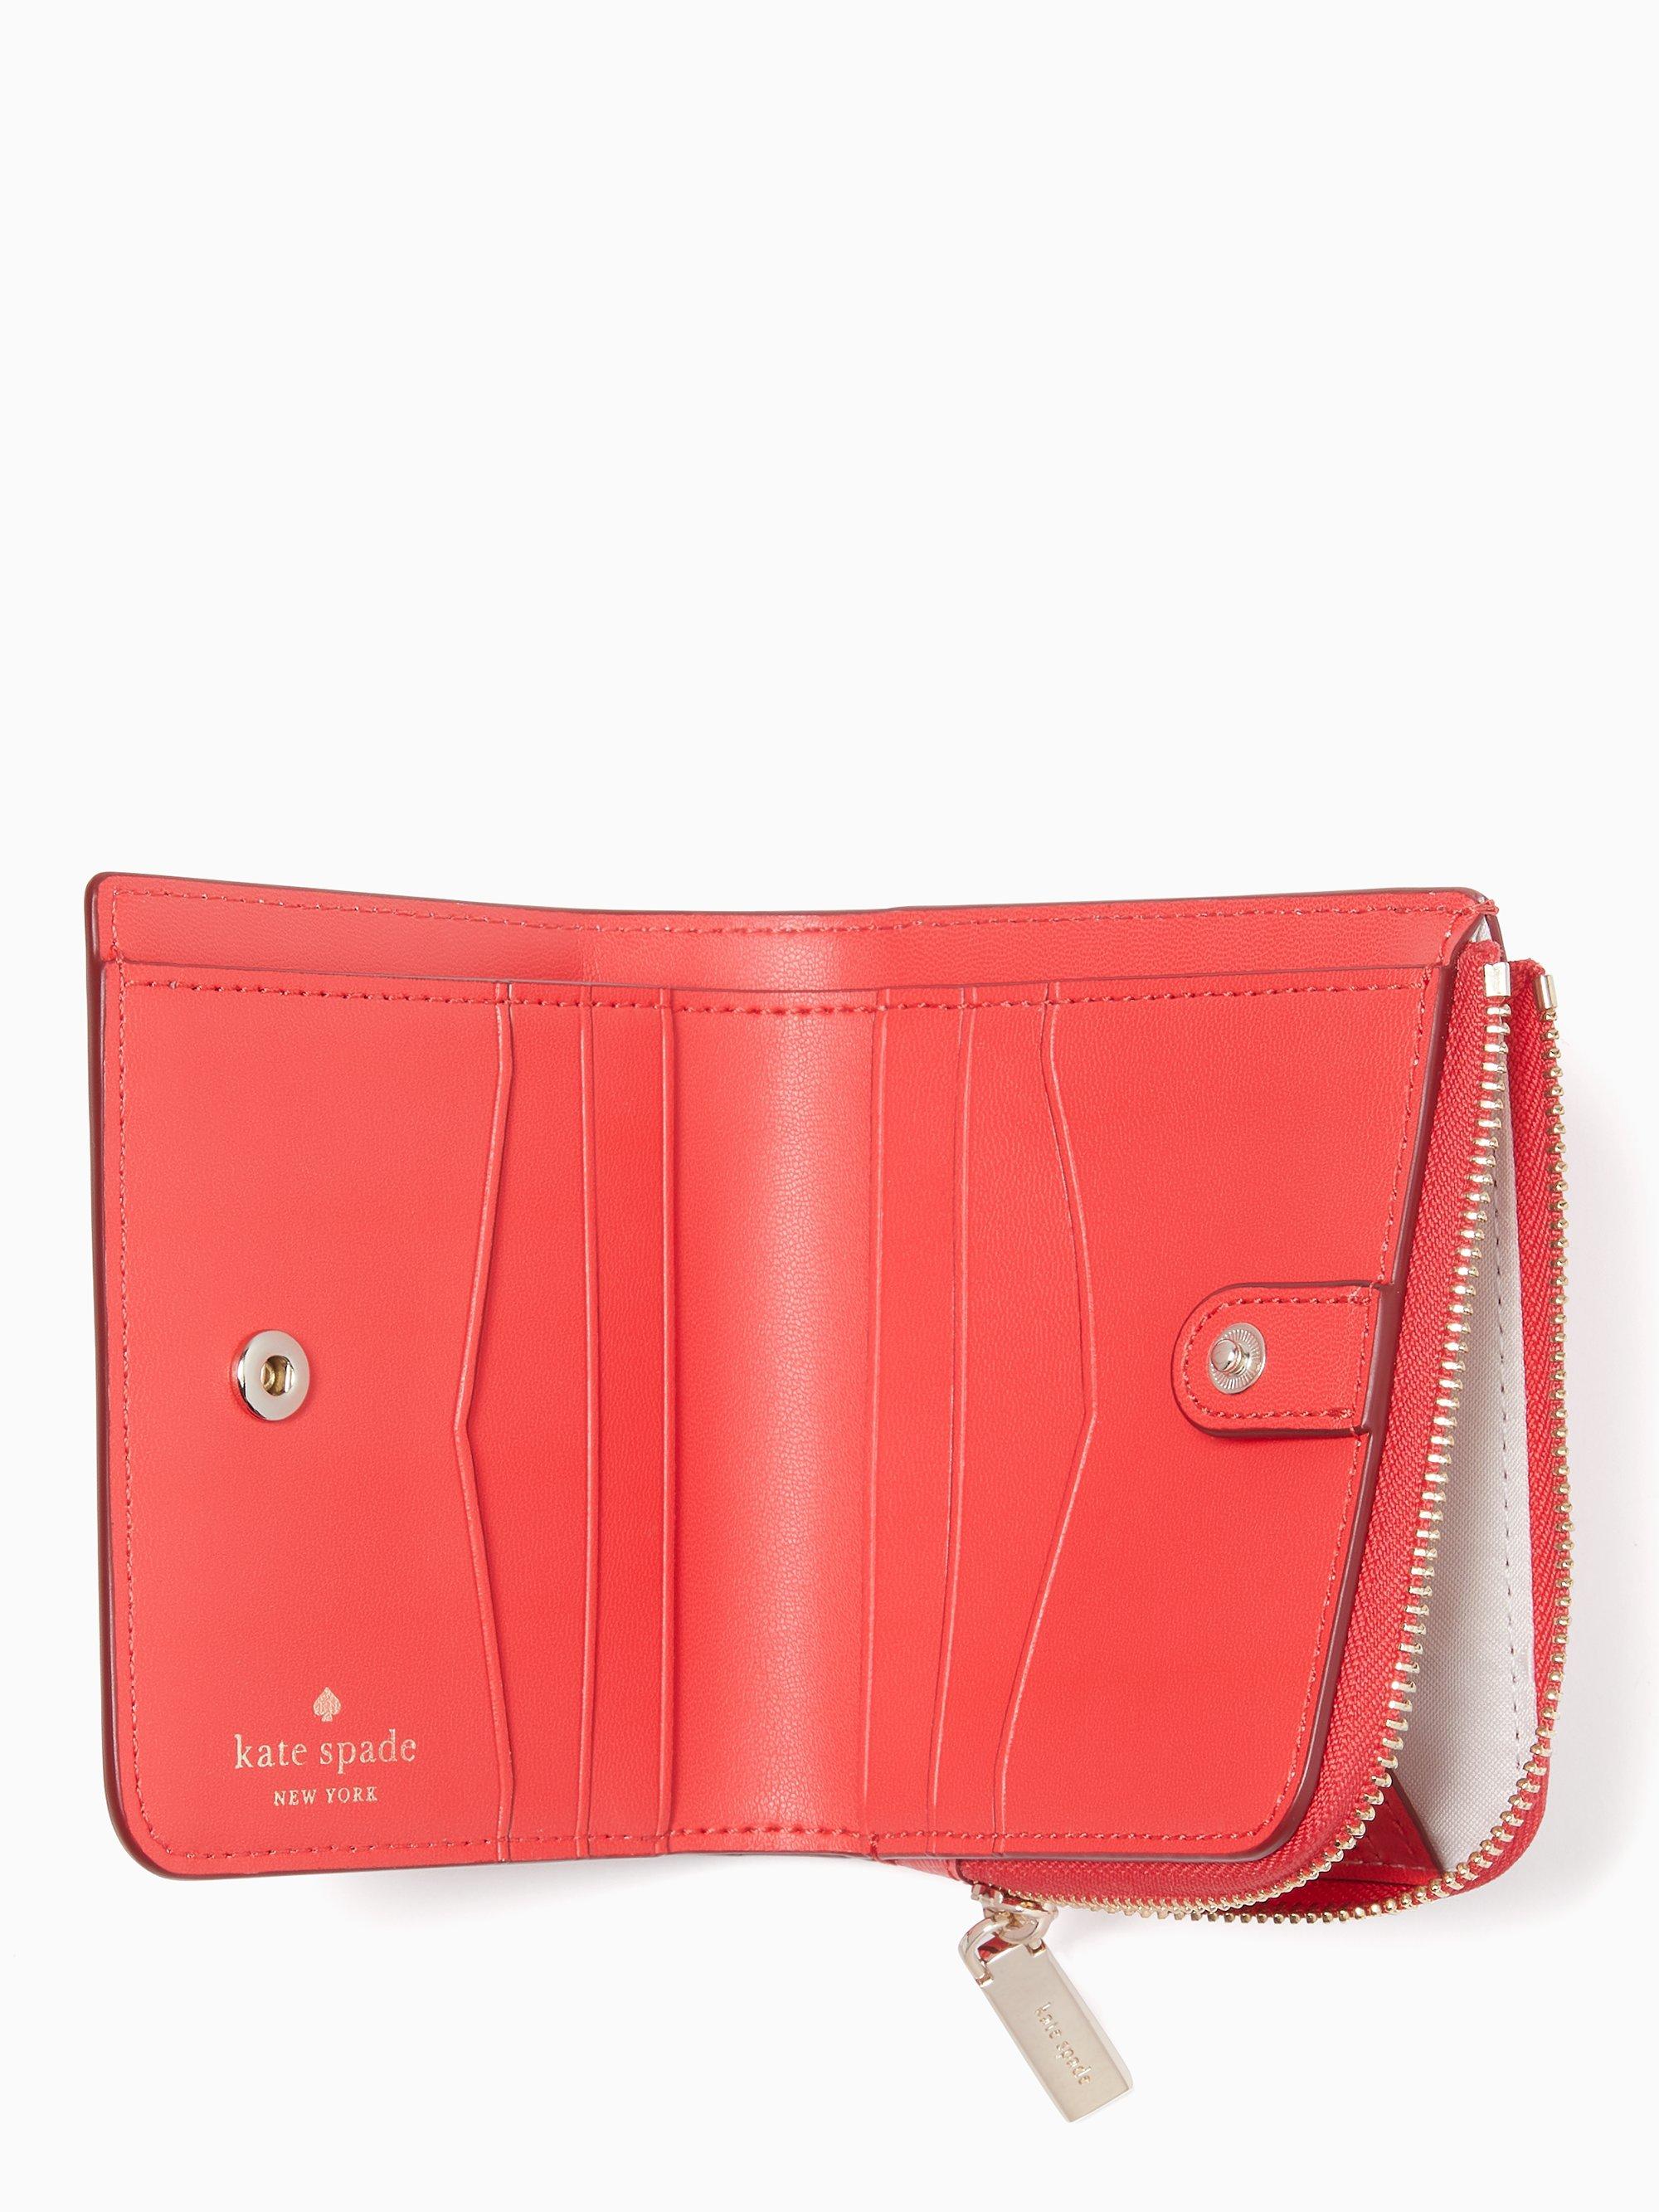 Kate Spade Staci Small L-zip Bifold Wallet in Red - Lyst